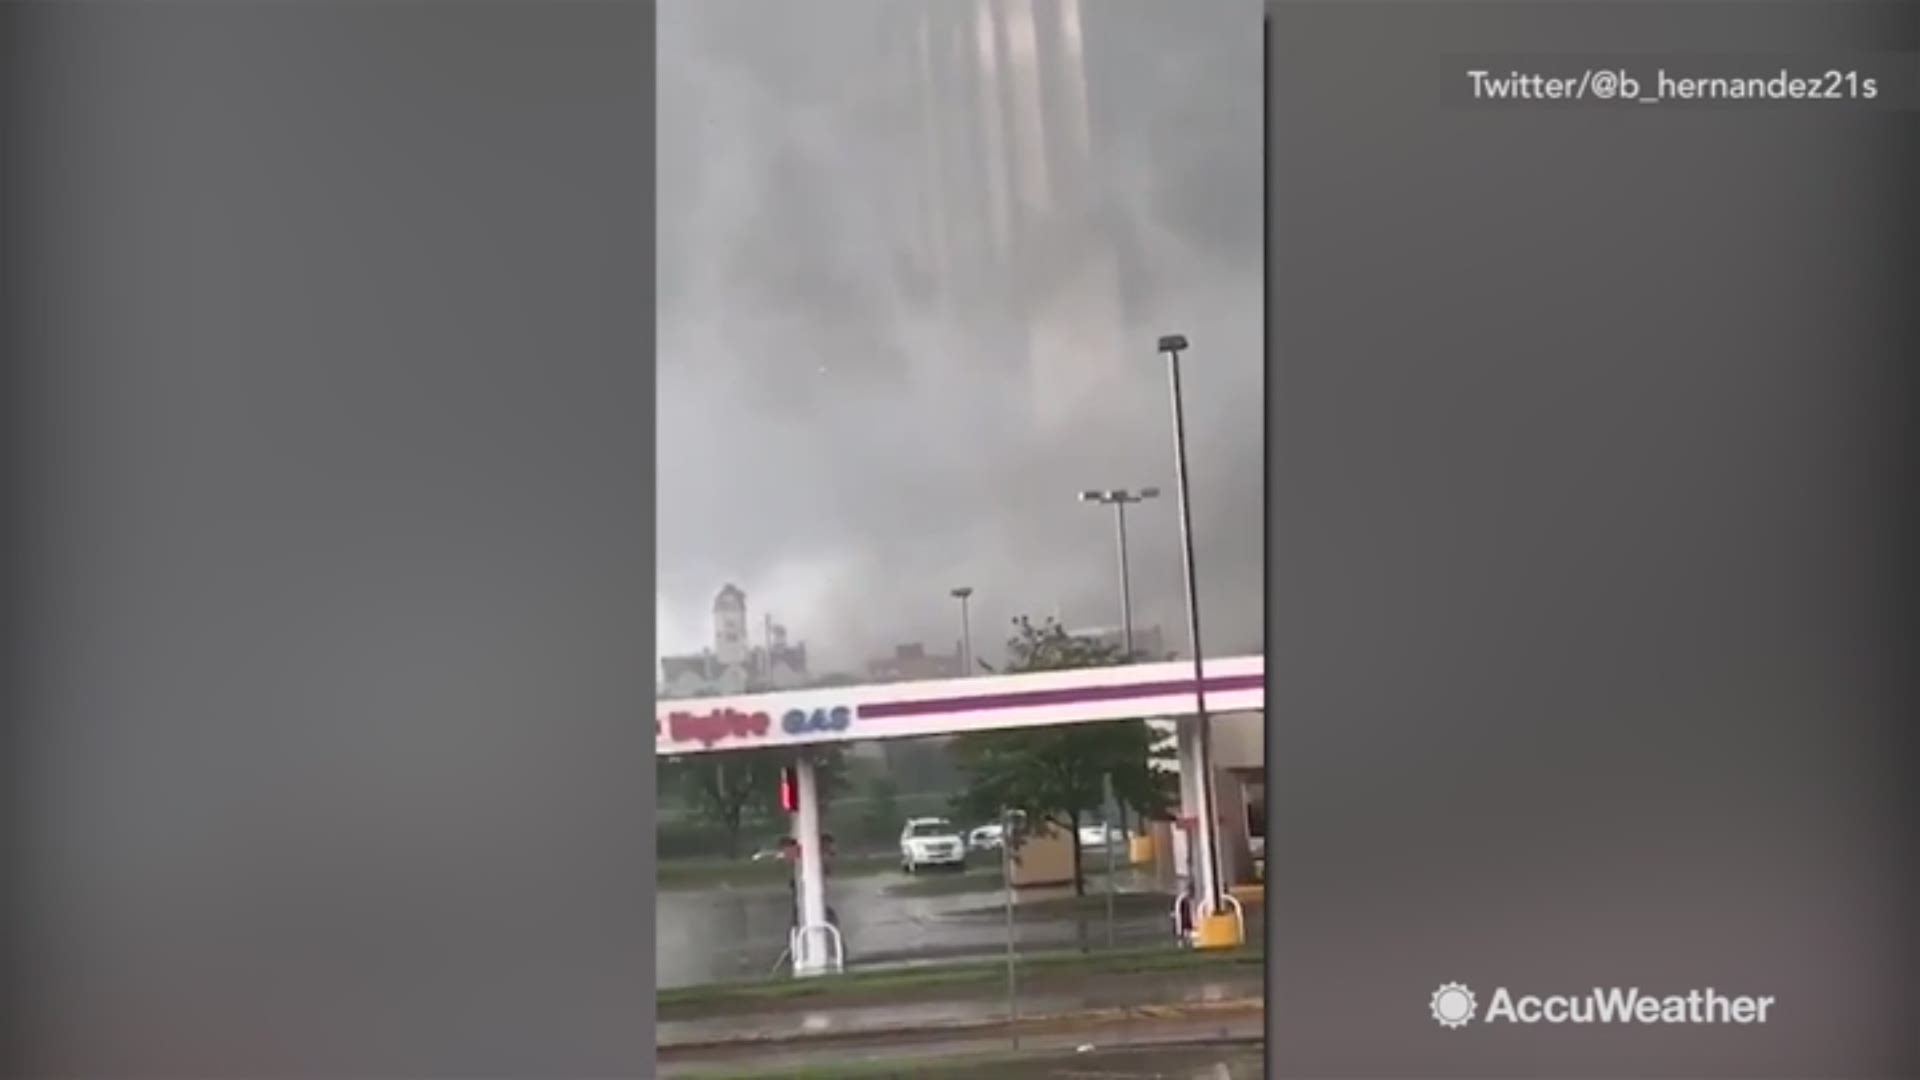 A state of emergency has been declared after a tornado touched down and devastated Marshalltown, Iowa. Damage has been reported to buildings across the town, including the courthouse. Several people were taken to the hospital with injuries.